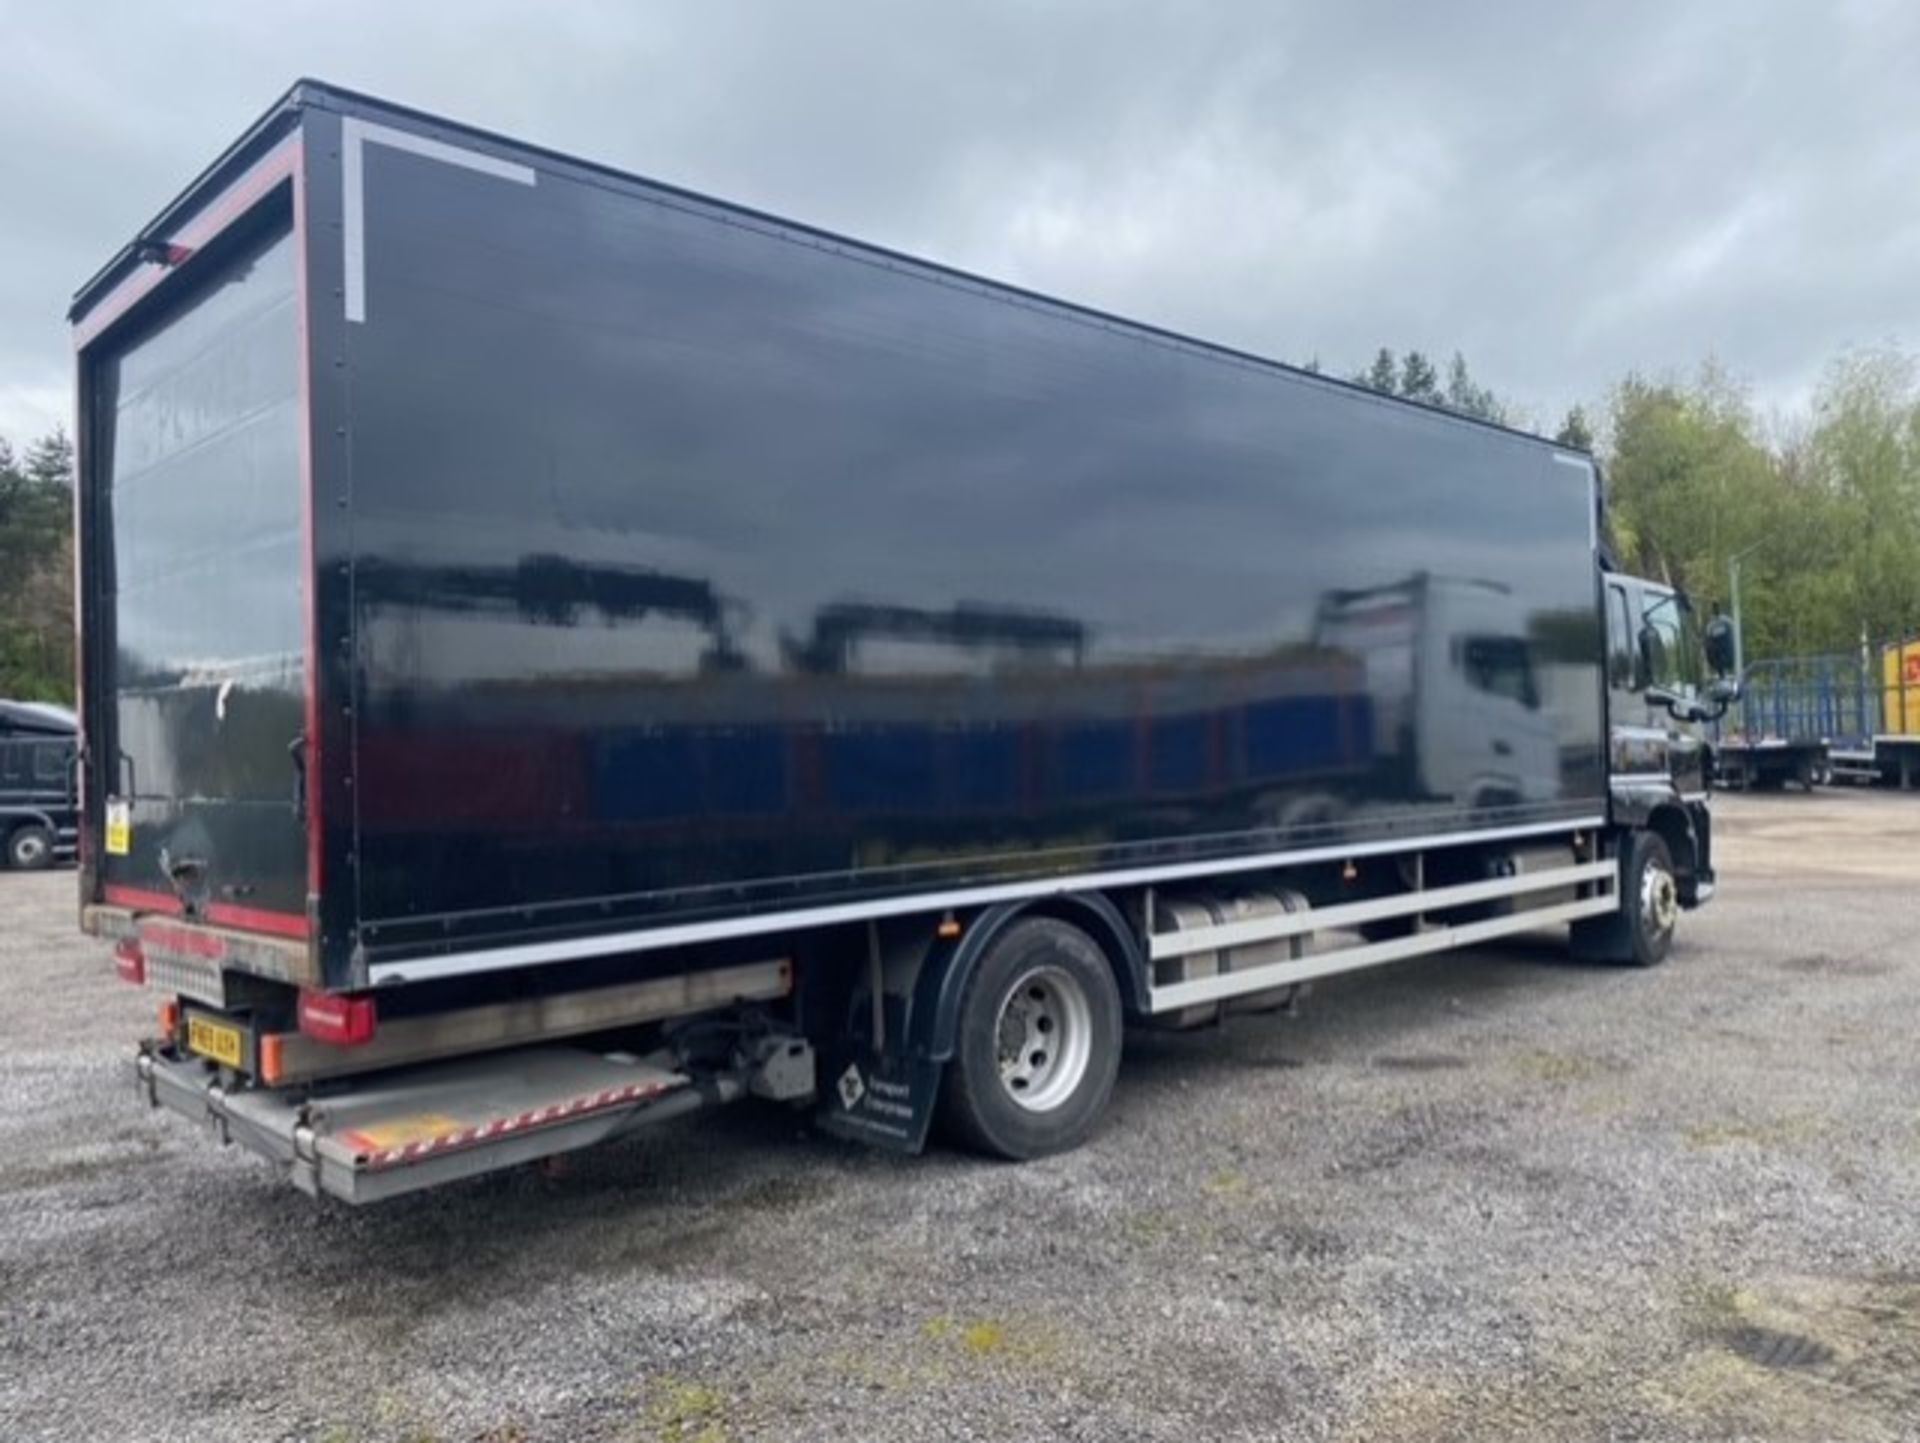 2019, DAF CF 260 FA (Ex-Fleet Owned & Maintained) - FN69 AXH (18 Ton Rigid Truck with Tail Lift) - Image 19 of 22